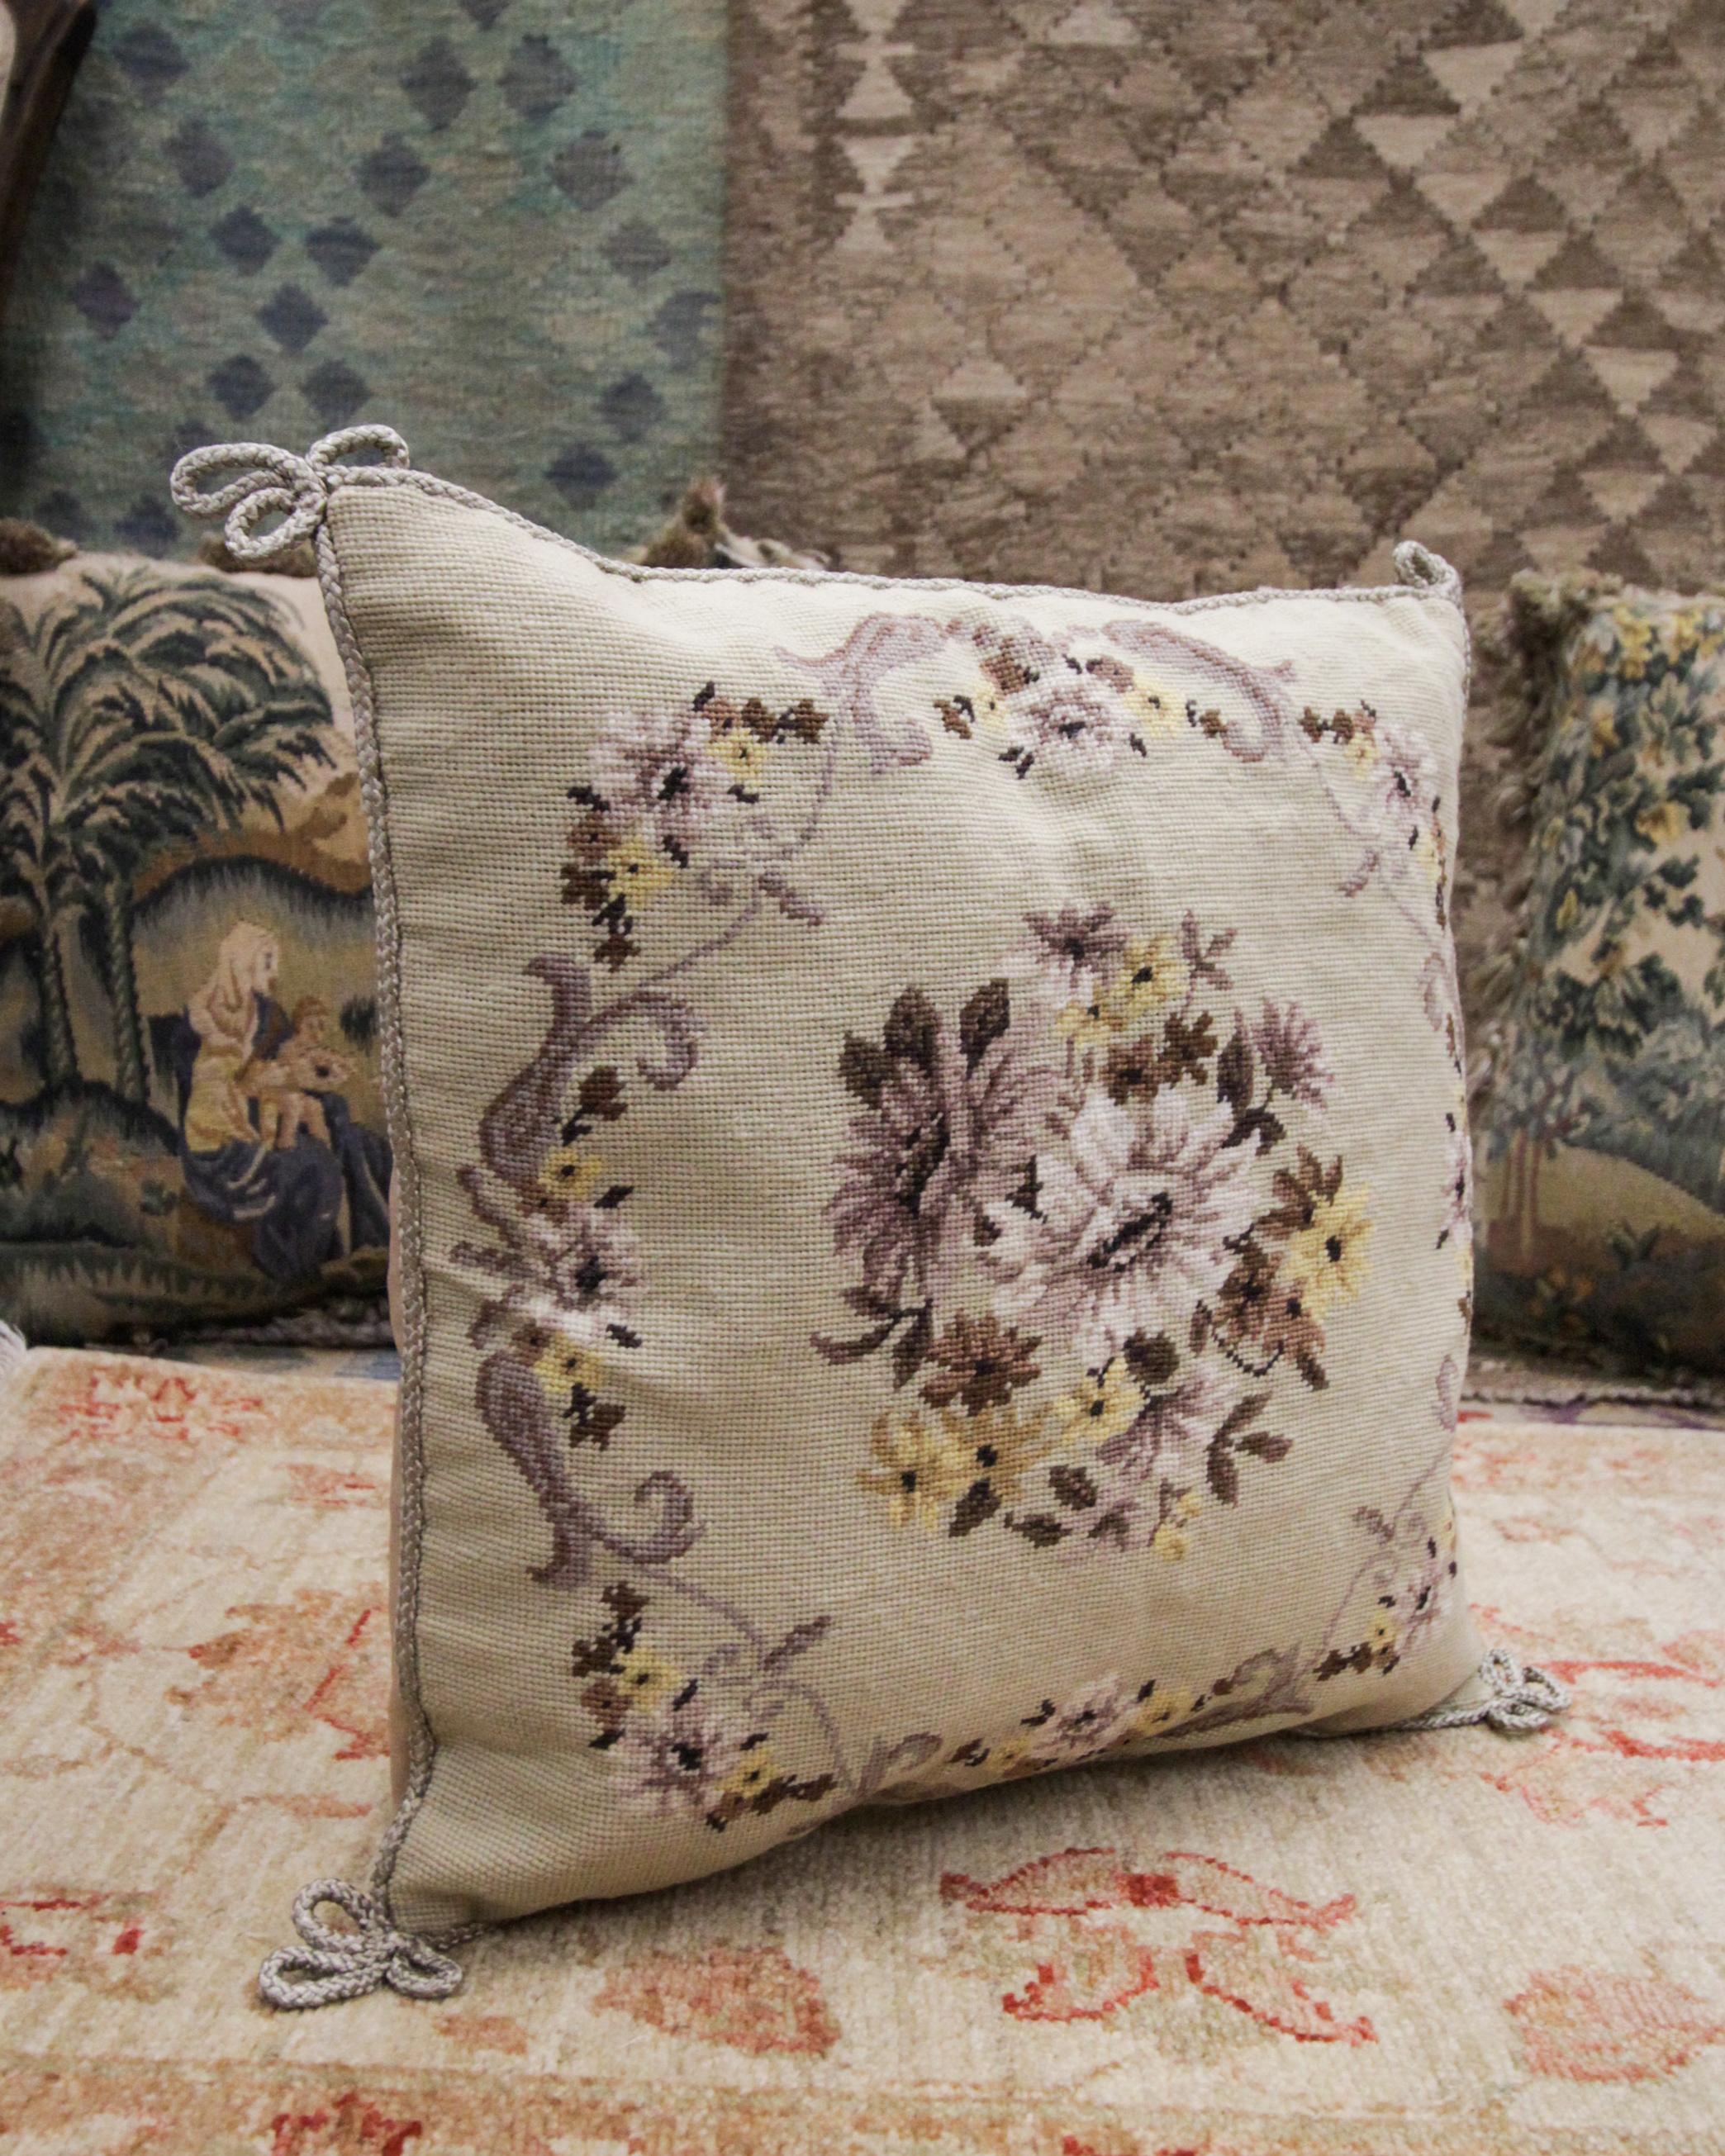 Hollywood Regency Floral Handmade Cushion Cover, Needlepoint Cream Purple Wool Scatter Cushion